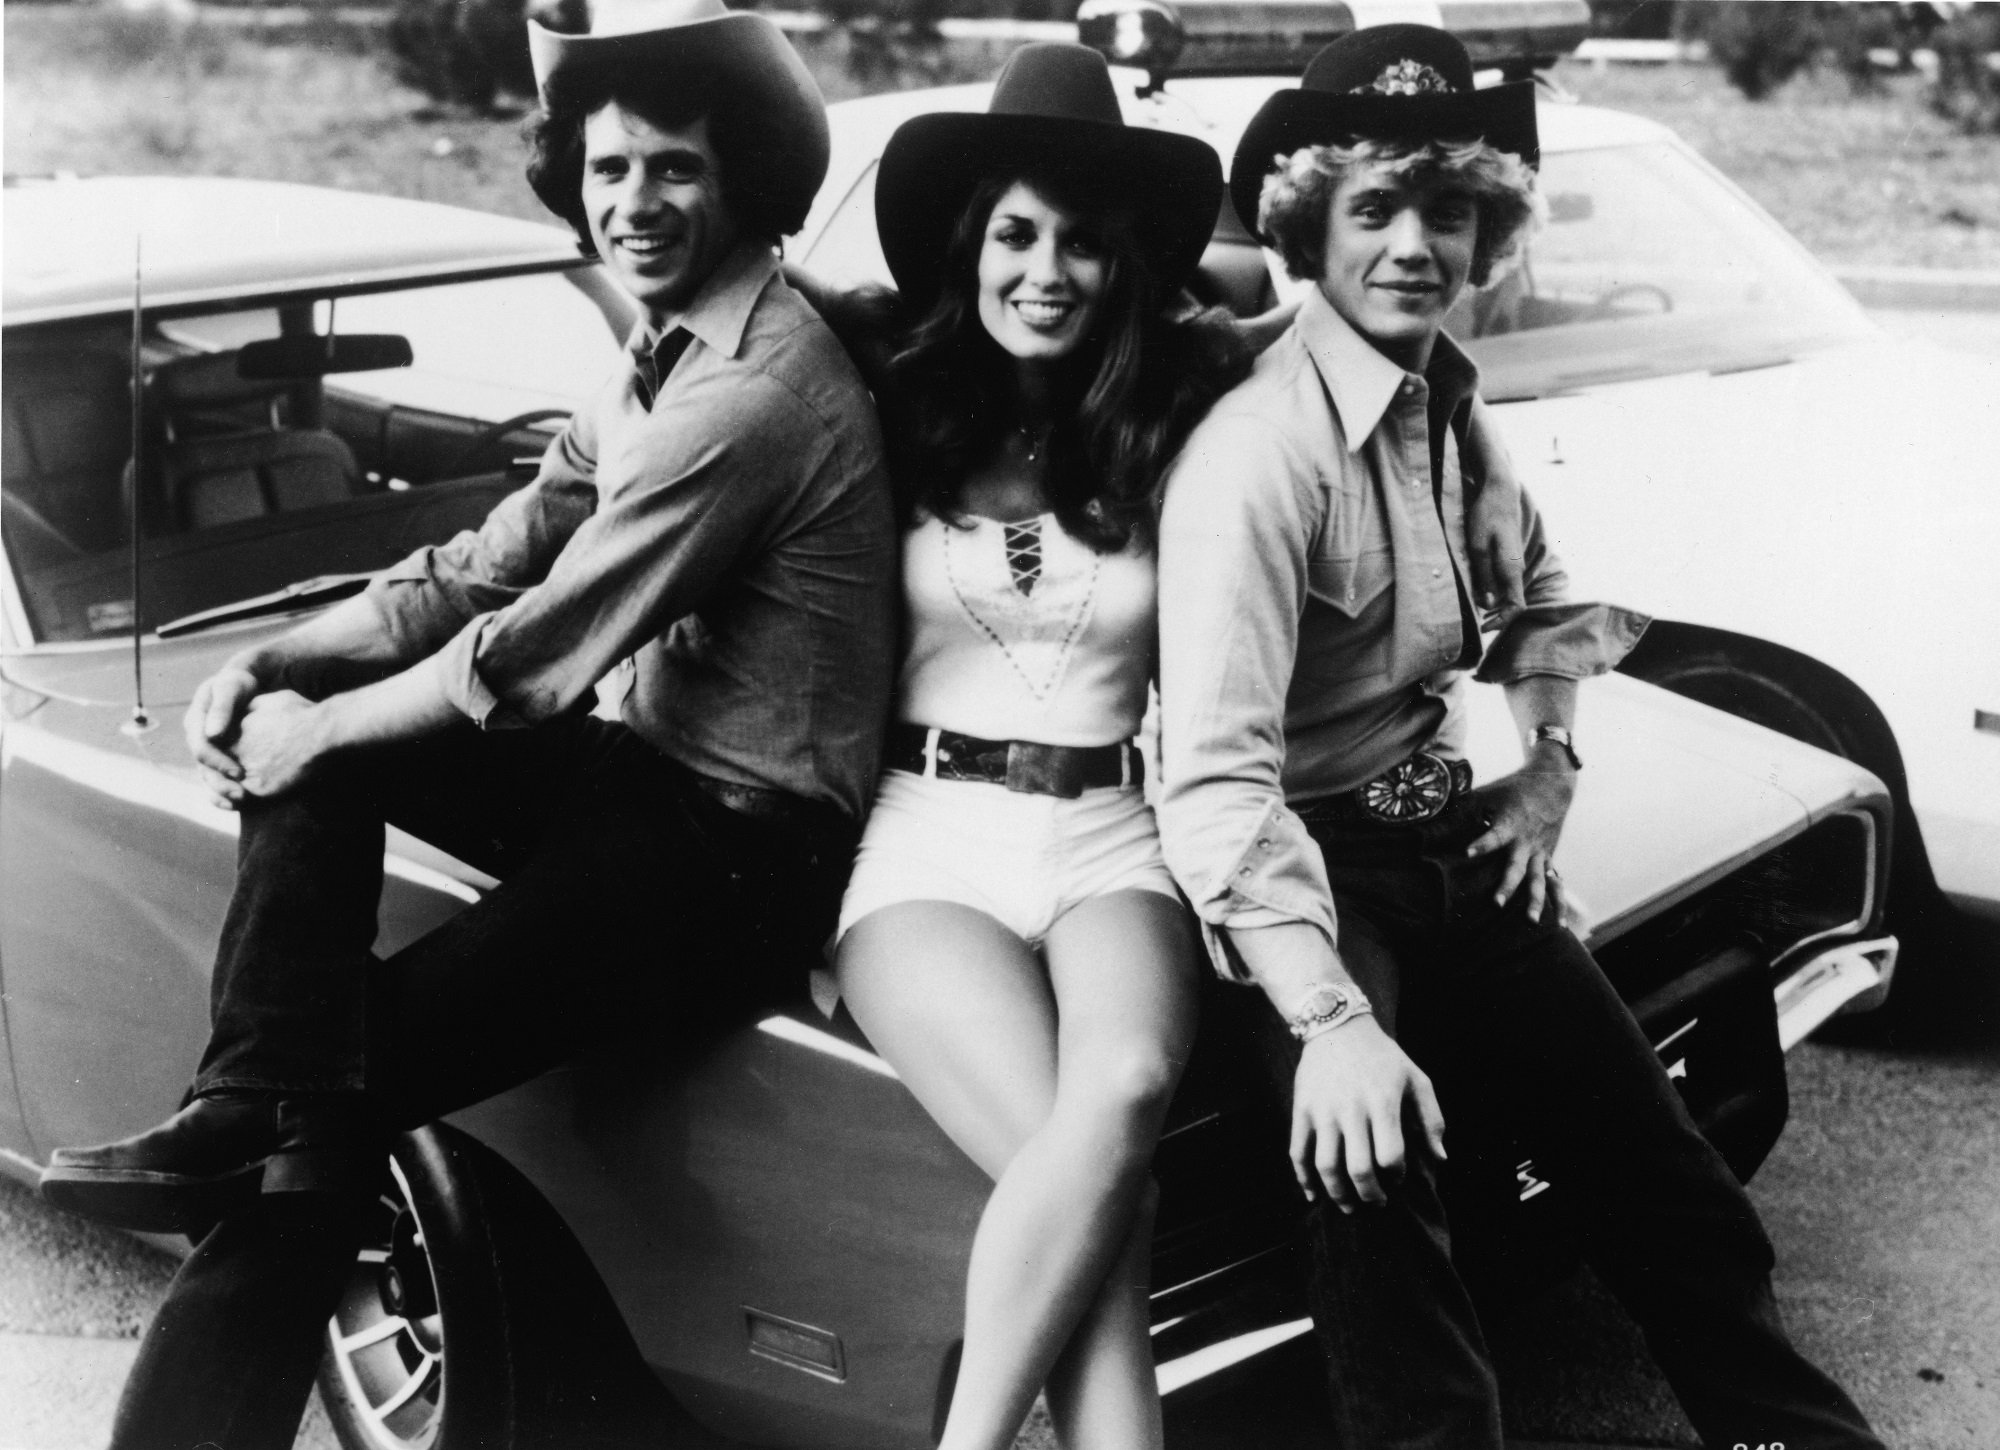 Tom Wopat, Catherine Bach, and John Schneider sitting on the hood of the car, the General Lee for the television show, The Dukes of Hazzard